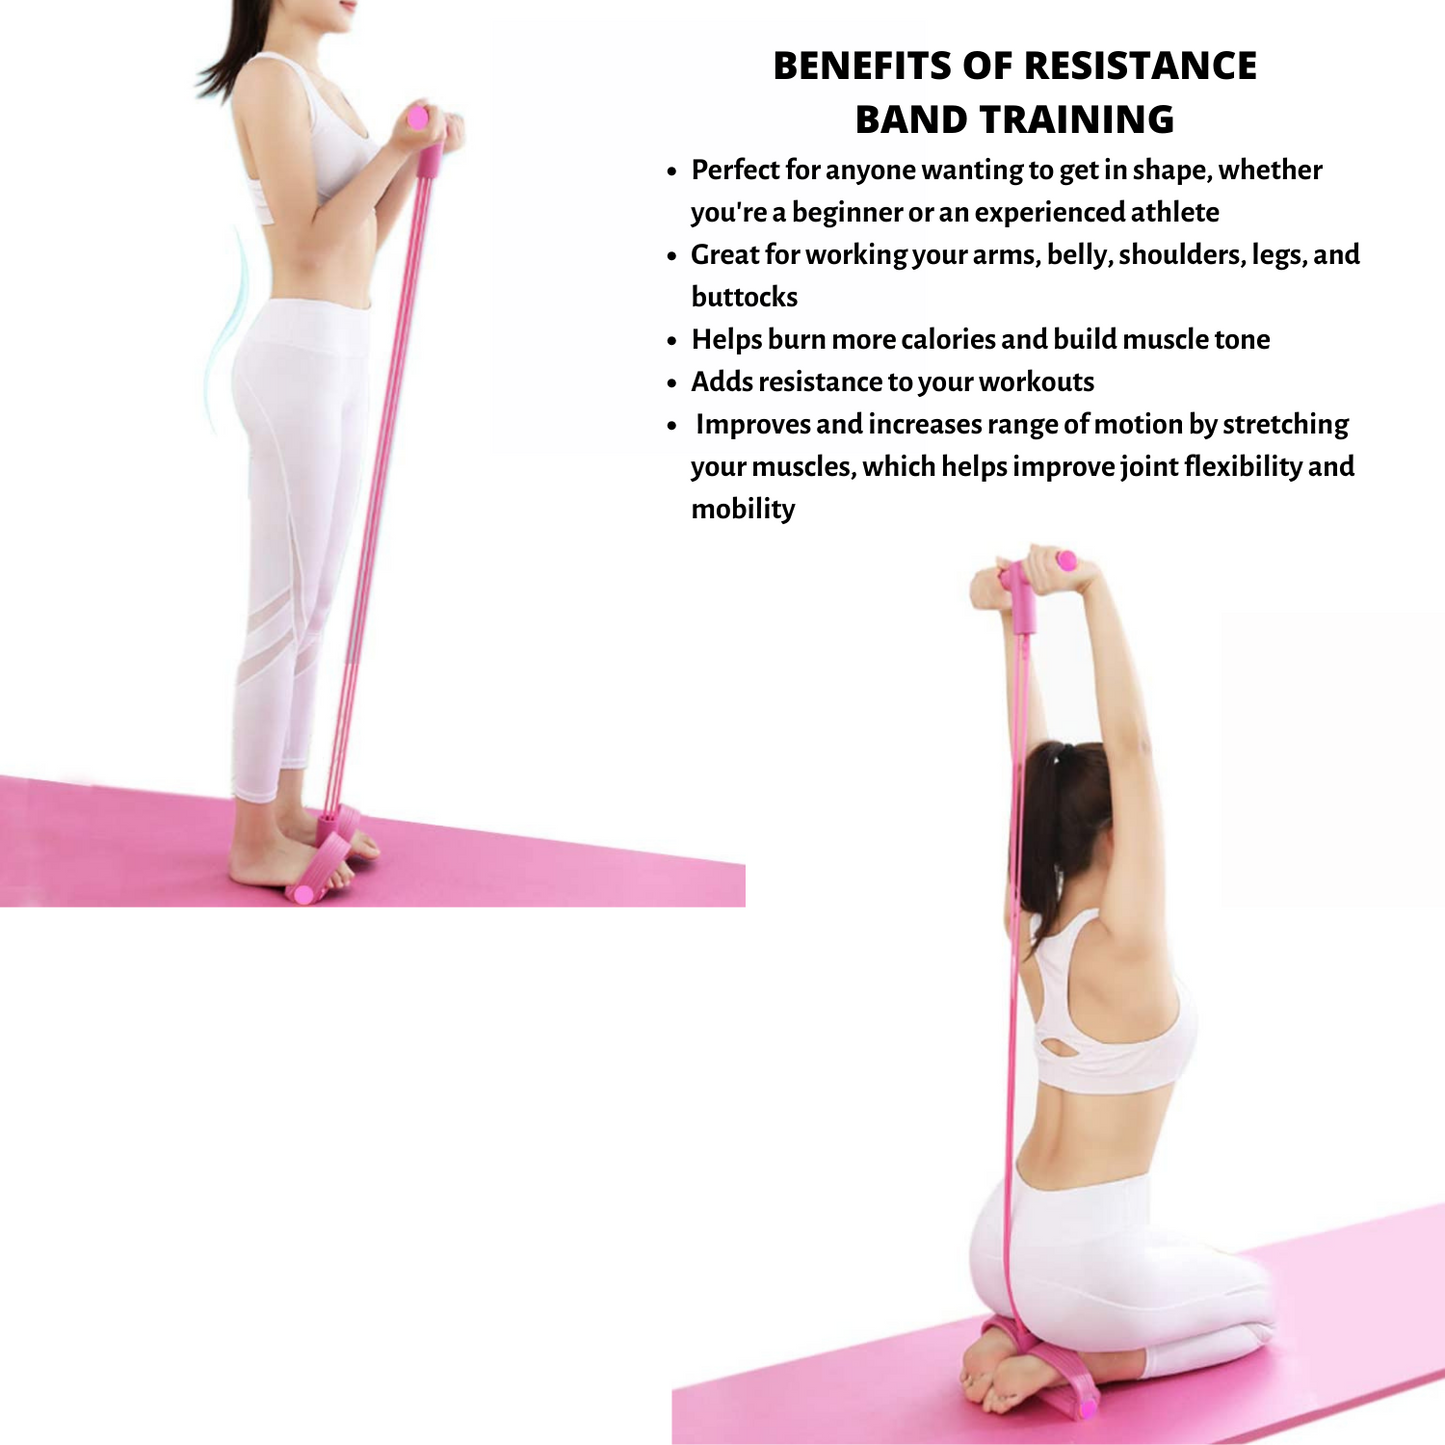 Pedal Resistance Band for Training Arms, Abs, Waist and Yoga Stretching, Goodies N Stuff